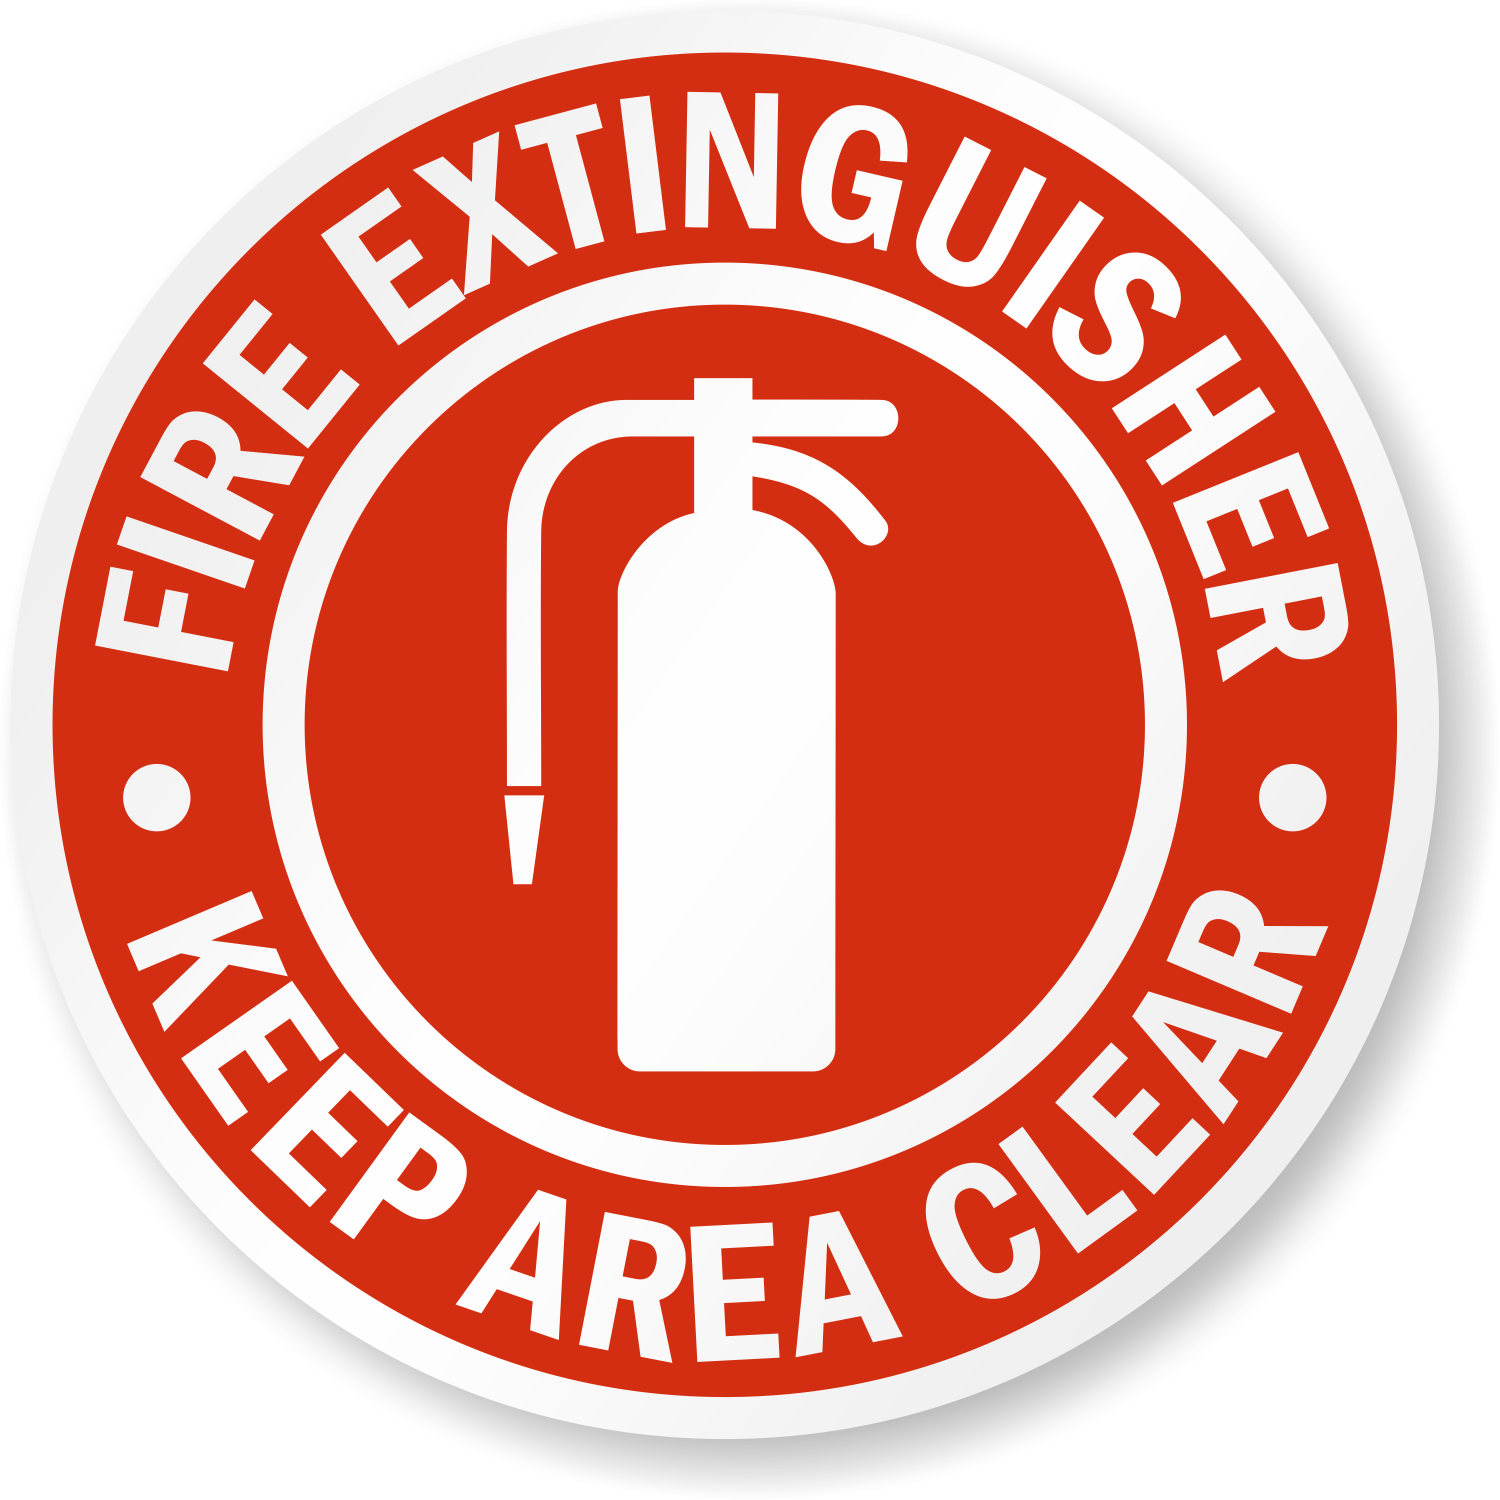 Fire Extinguisher Keep Area Clear Adhesive Floor Sign, SKU SF0270